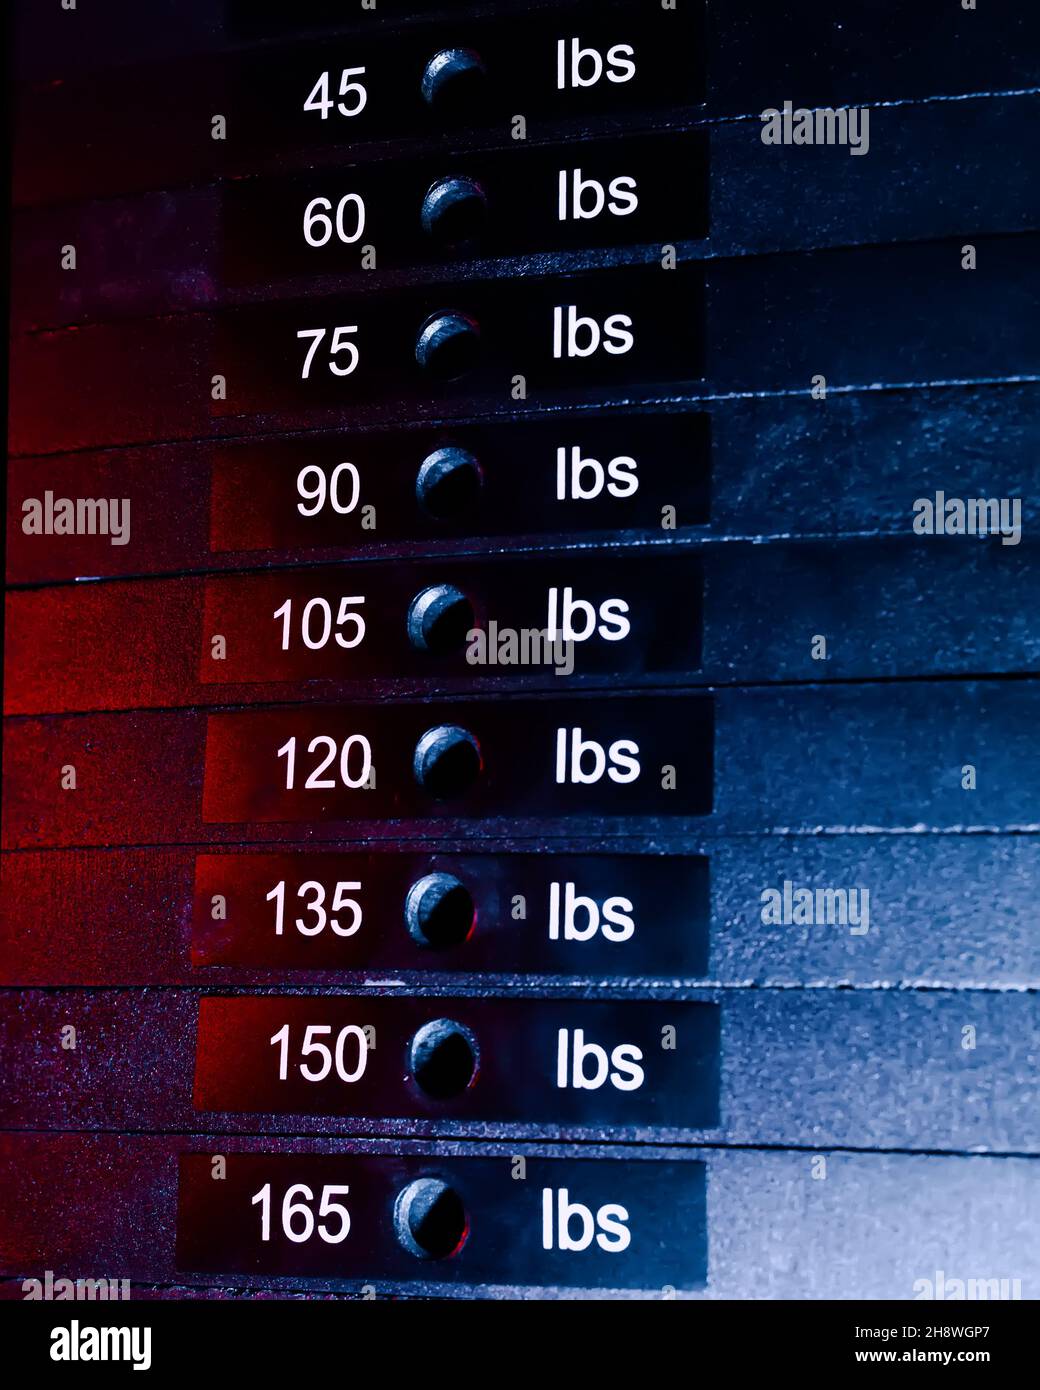 A cargo block on a sports simulator with numbers and weight. sports equipment close-up. Dark background Stock Photo